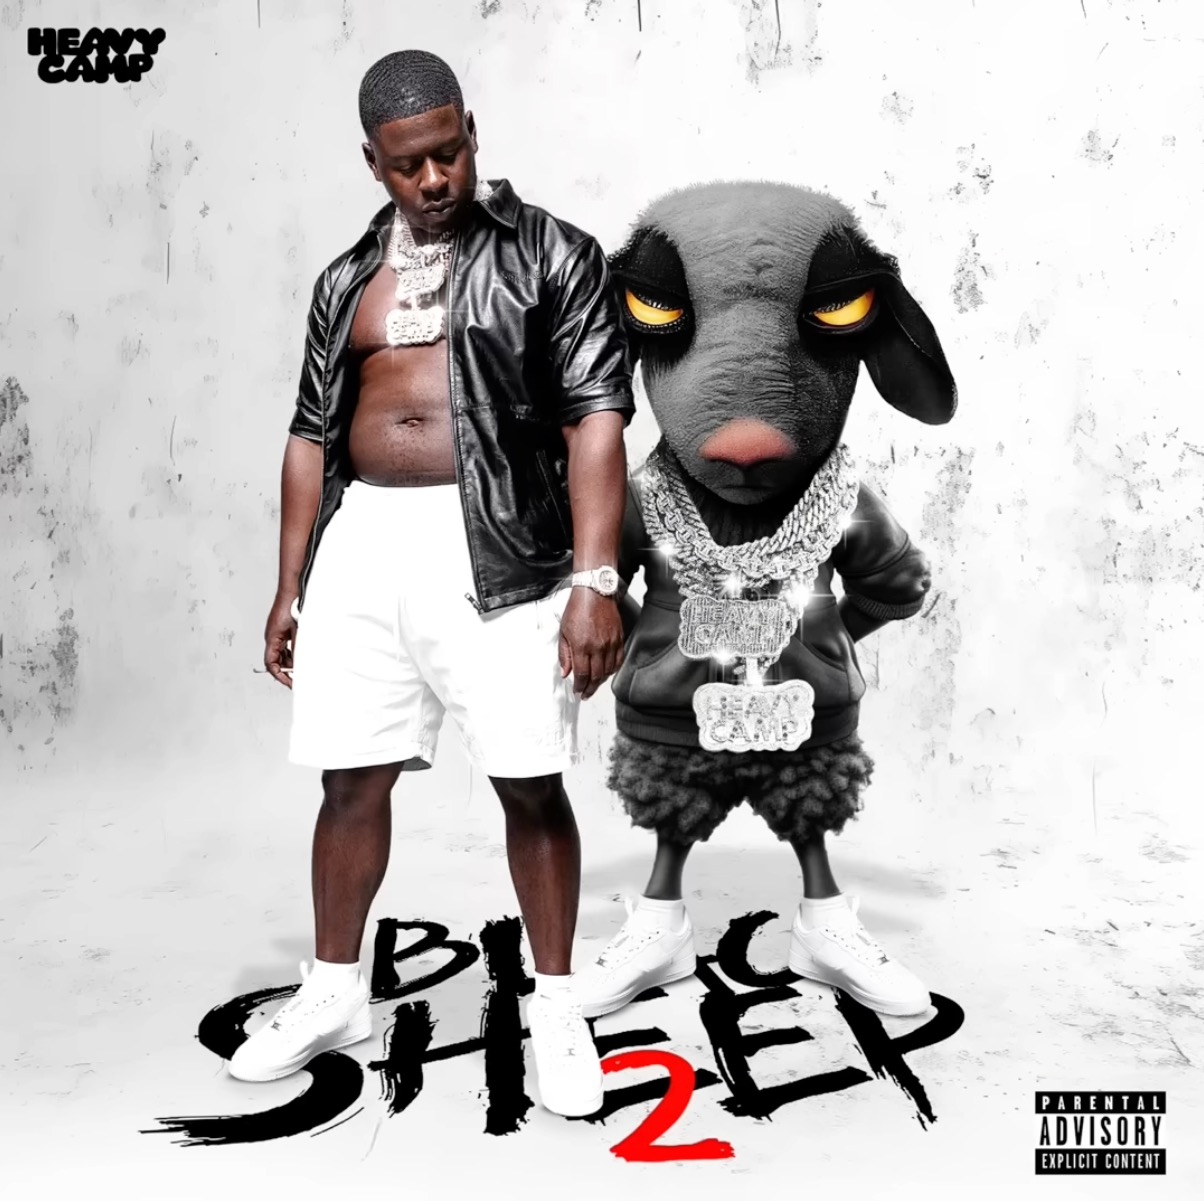 Blac Youngsta Seemingly Releases A Tribute Album To His Late Brother With “Blac Sheep 2”